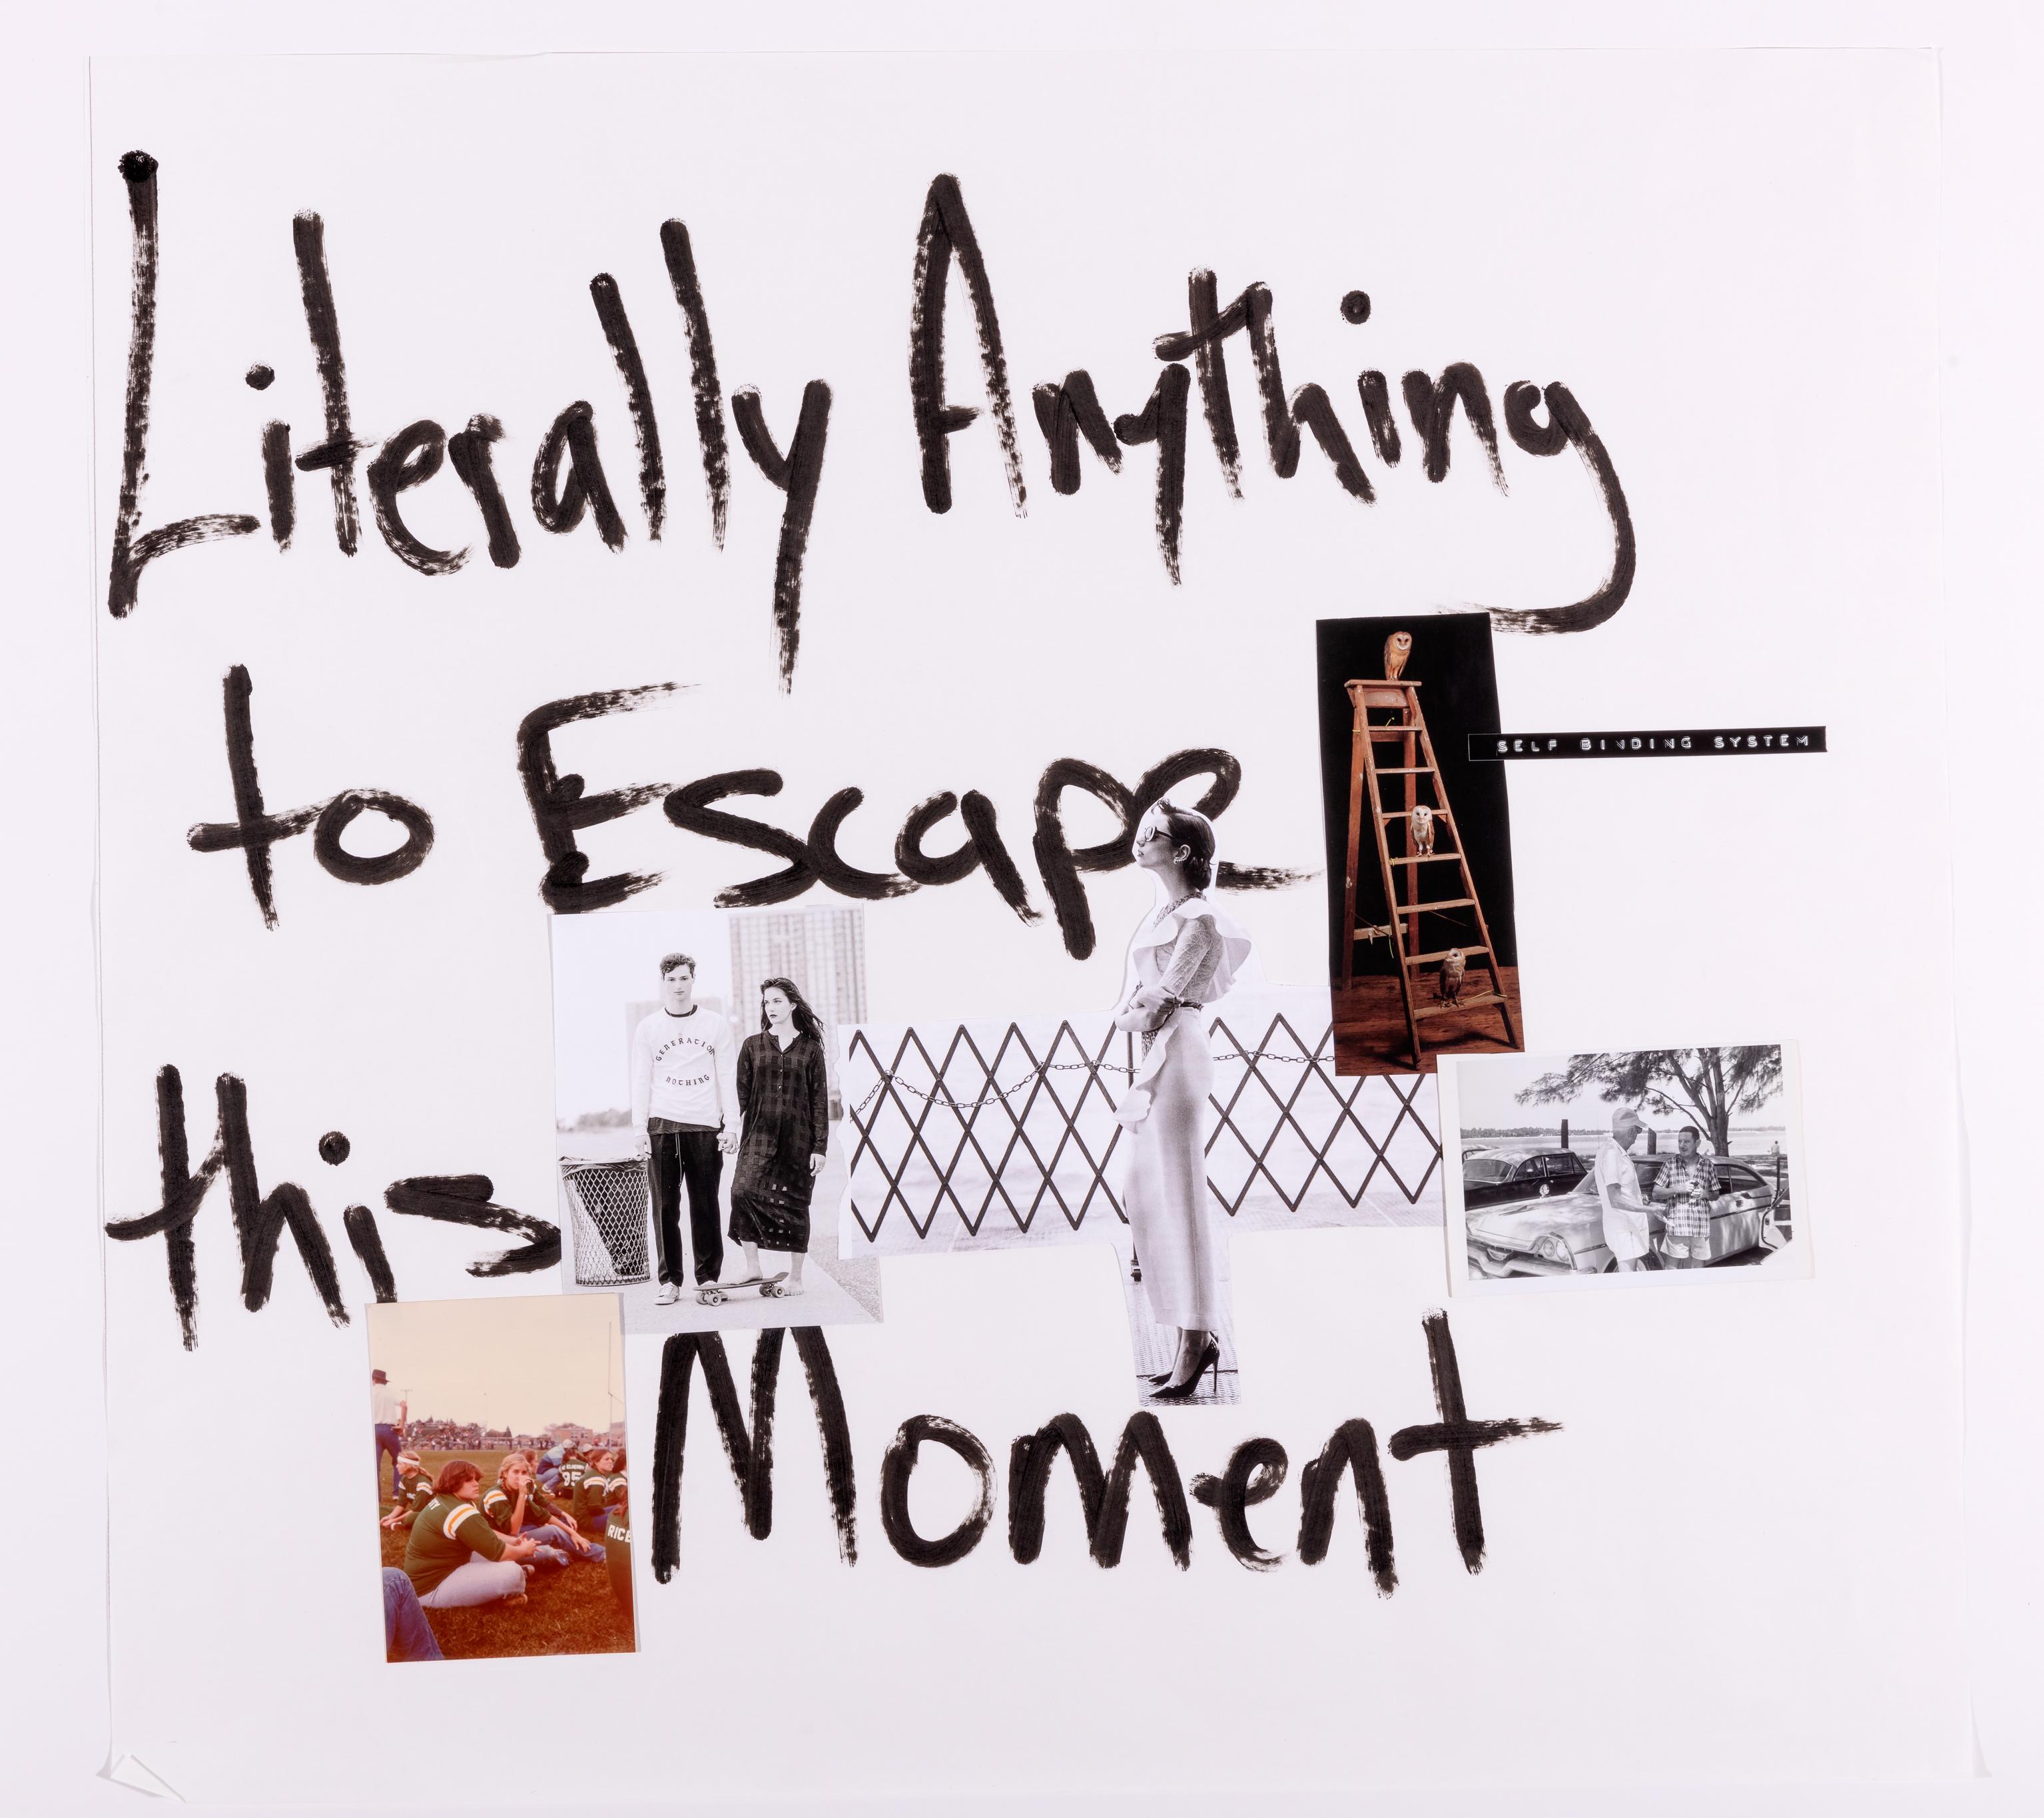 Literally Anything to Escape this Moment - Mixed Media Art by William Atkinson